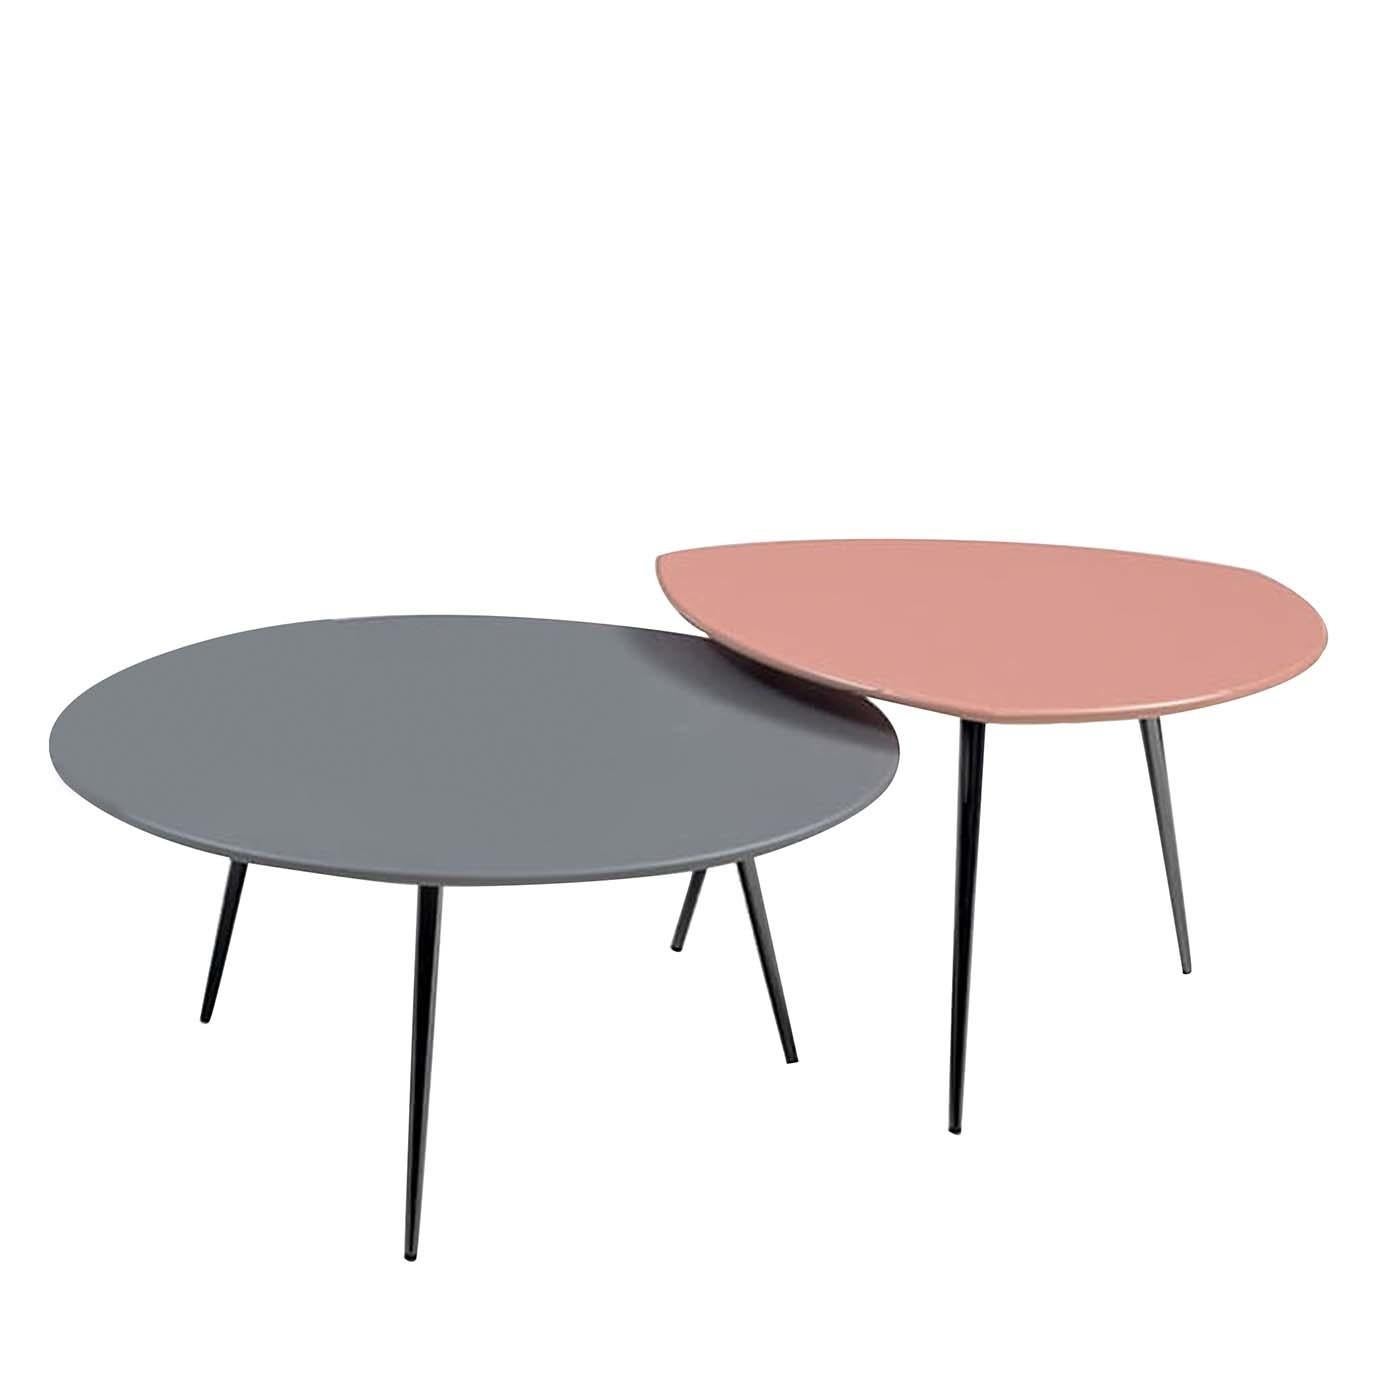 These stunning pieces of functional decor are part of the Cinquanta collection, named after the 1950s, a decade when charm and elegance were expressed in curved shapes and pastel colors. In this case, the MDF tops have grey and pink colors (also